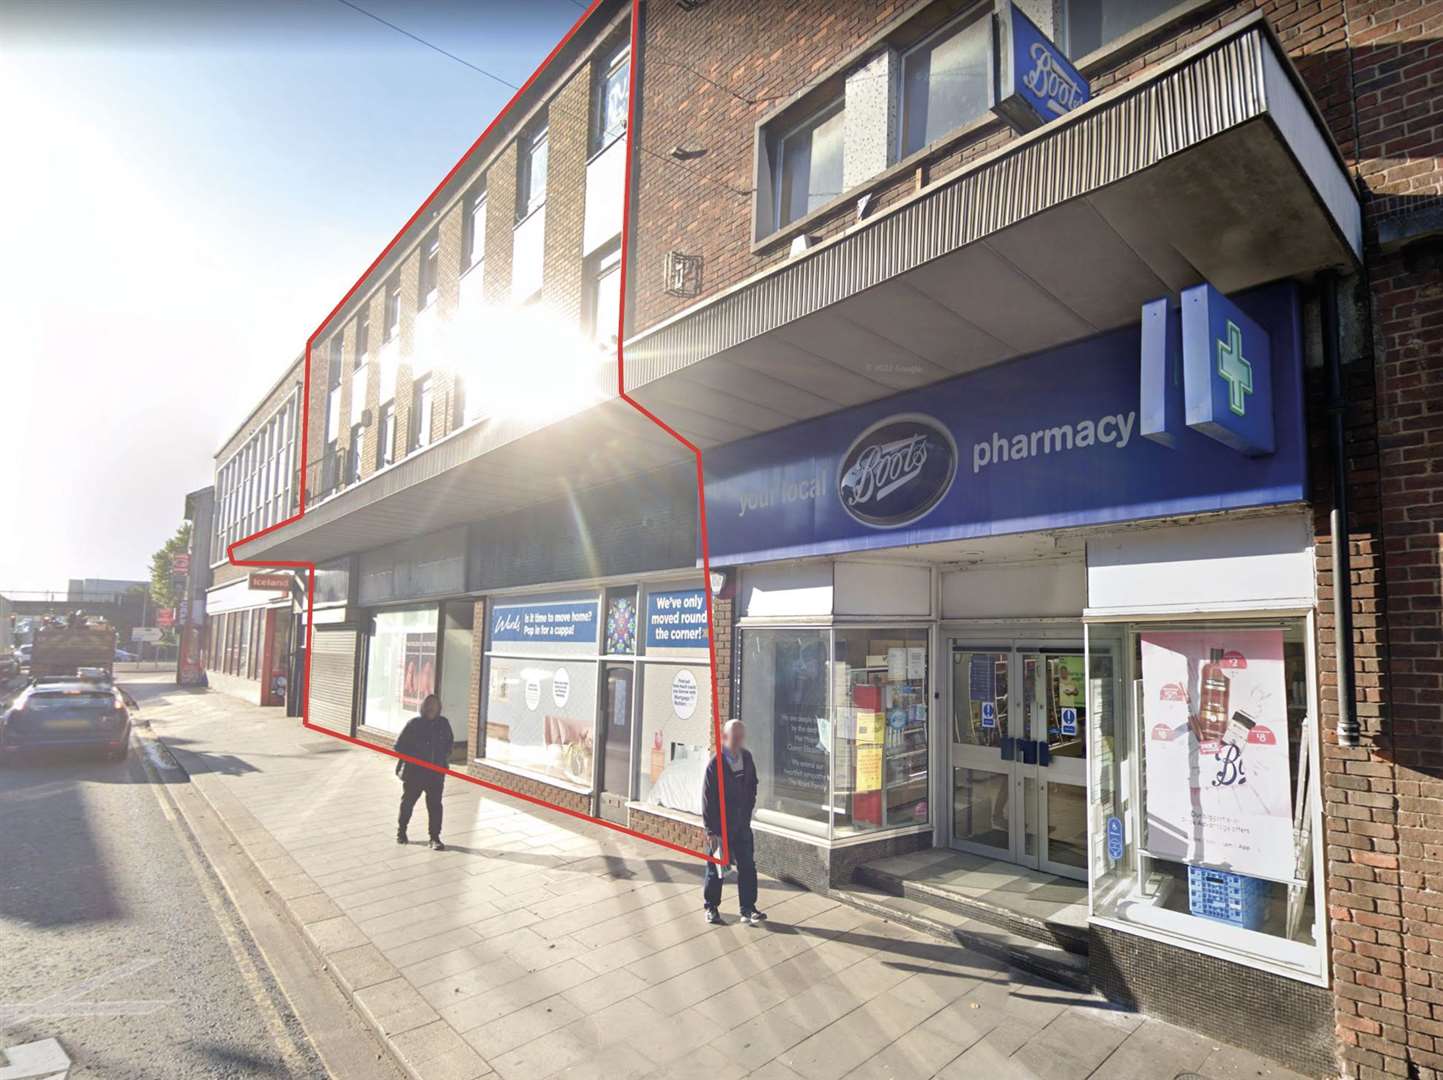 The marketplace would sit between Iceland and Boots. Picture: Improve Strood | Tanvi Paul